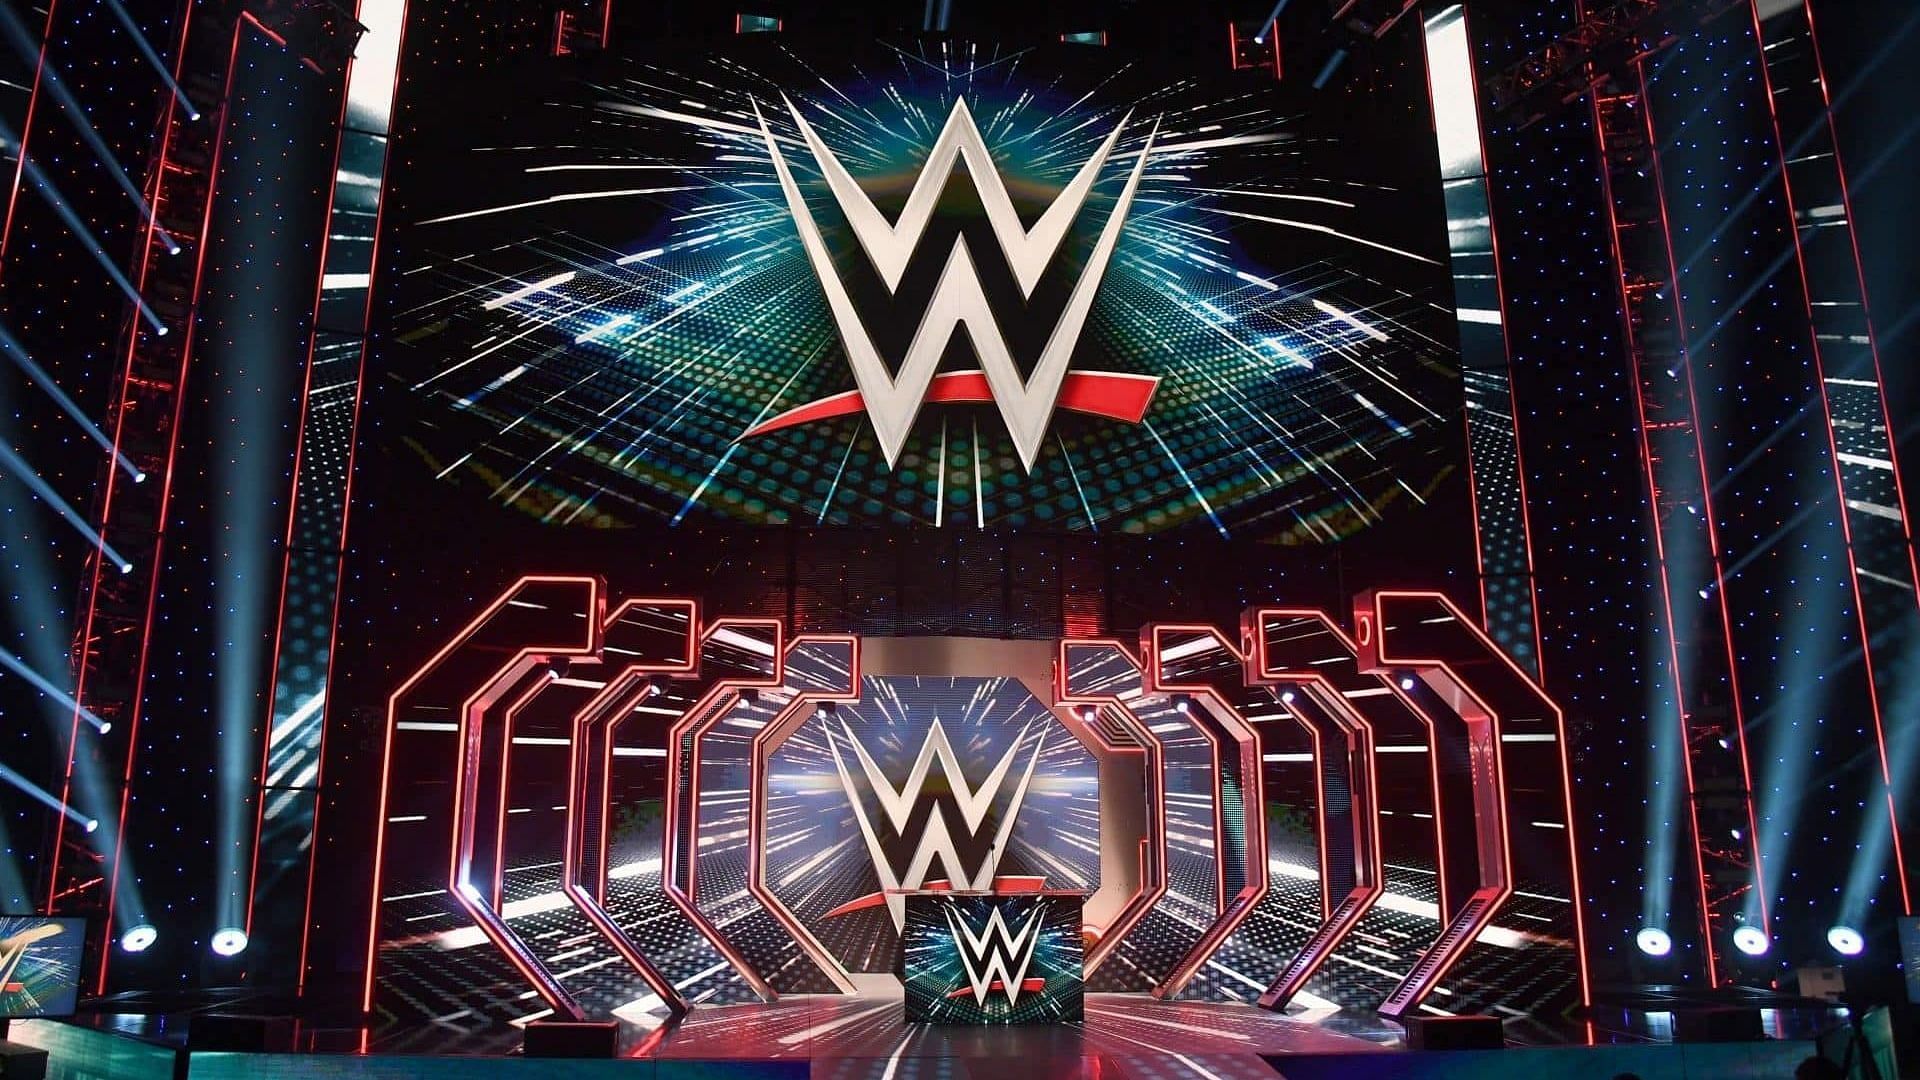 The WWE logos and stage/set on display inside arena